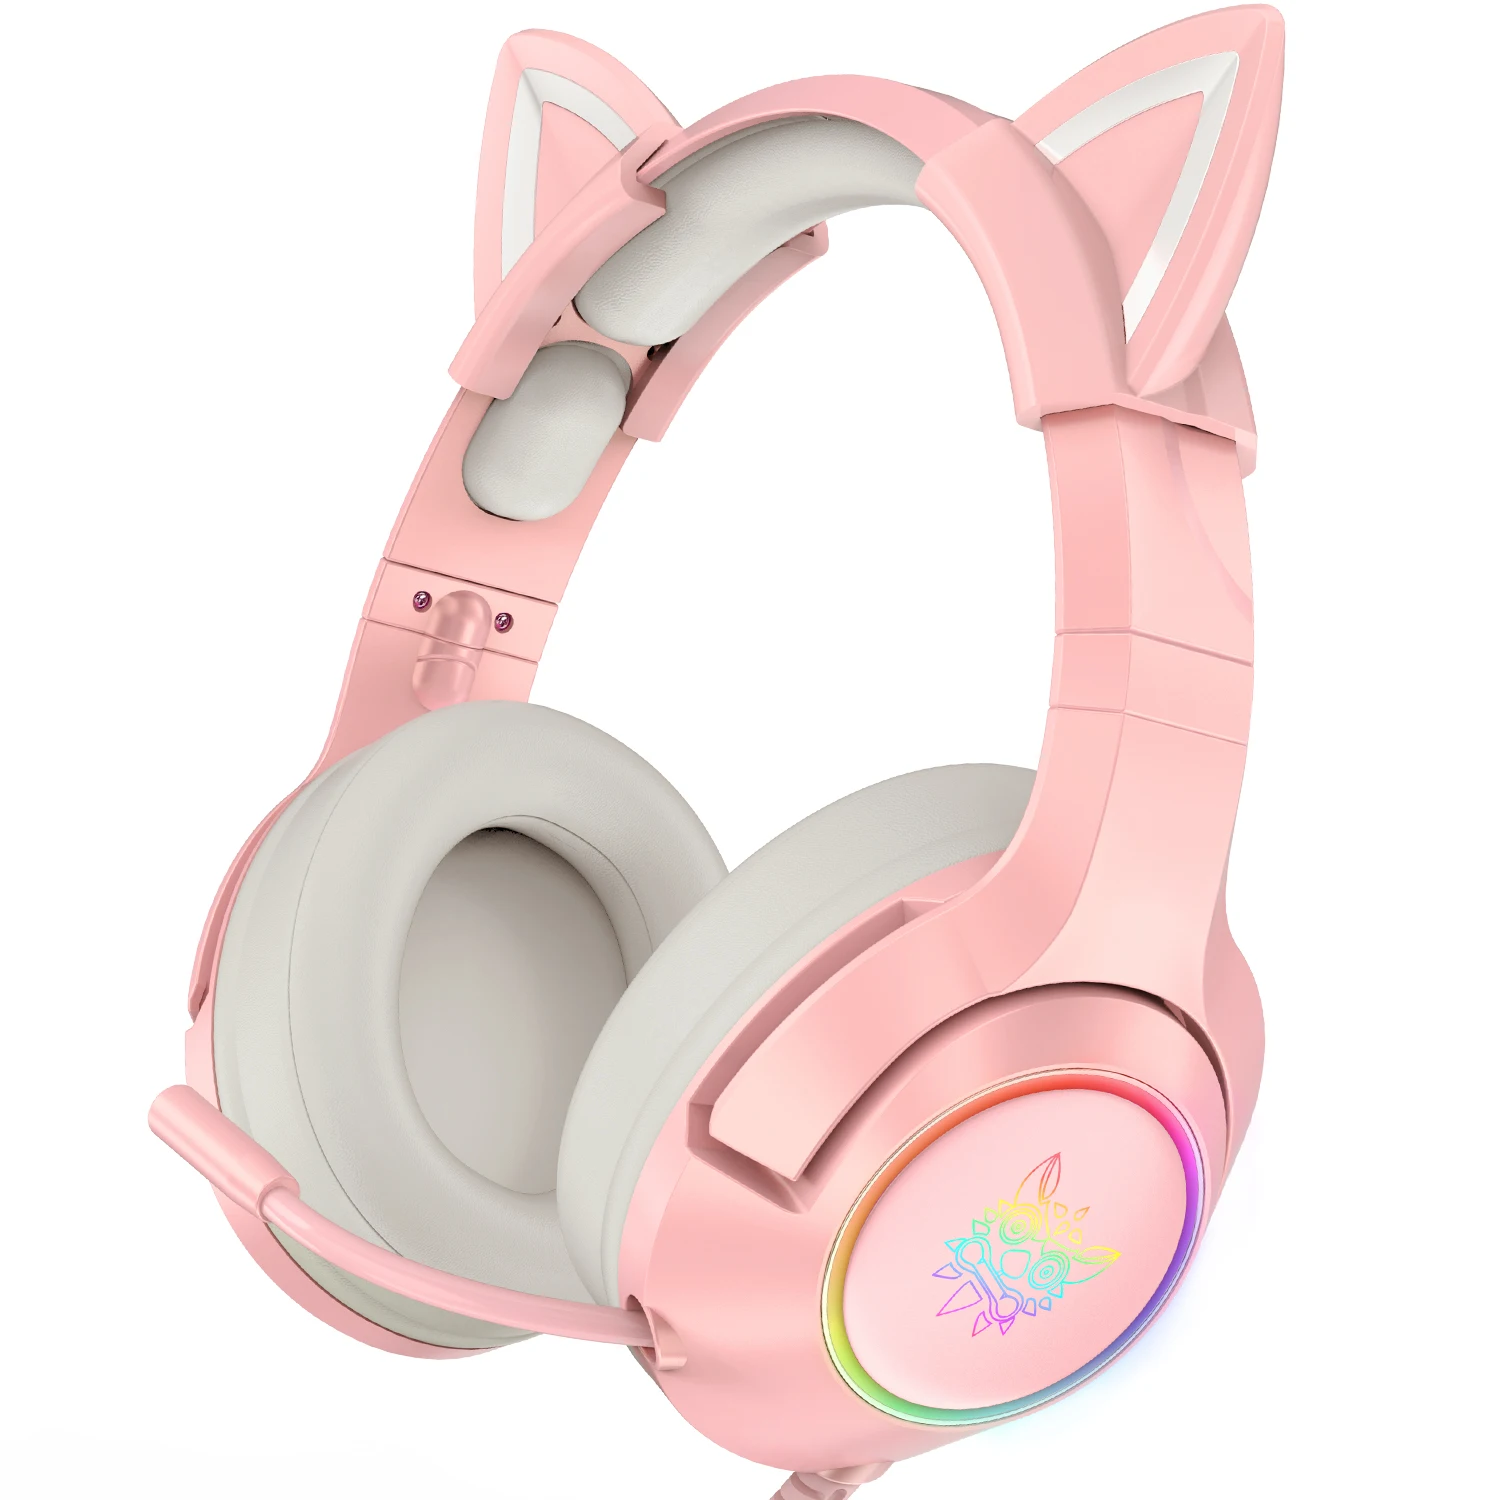 

ONIKUMA gaming headset K9 pink 7.1 surround sound New 3.5mm Stereo Headphone Gaming Headsets for PS4 PC PHONE LAPTOP